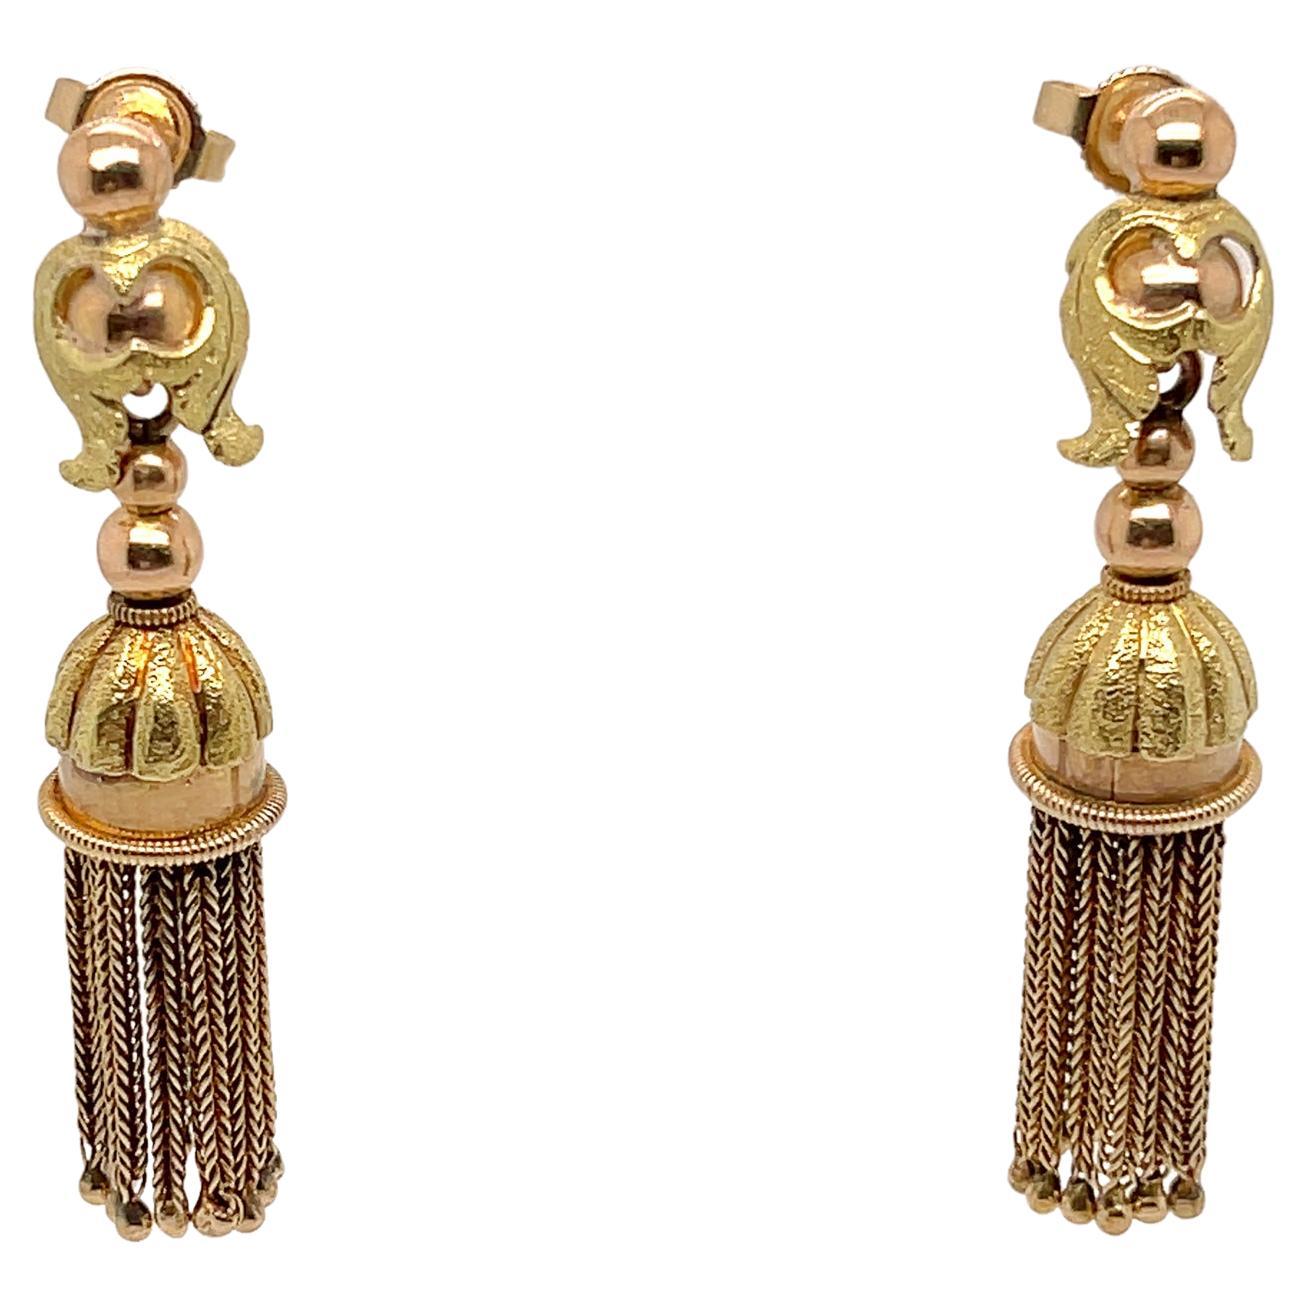 A fine pair of antique Victorian gold tassel earrings that are likely conversions.

In rose and yellow golds. 

With tassels dangling from the center of bell shaped drop and ornately engraved and textured filigree designs at the top of each post.